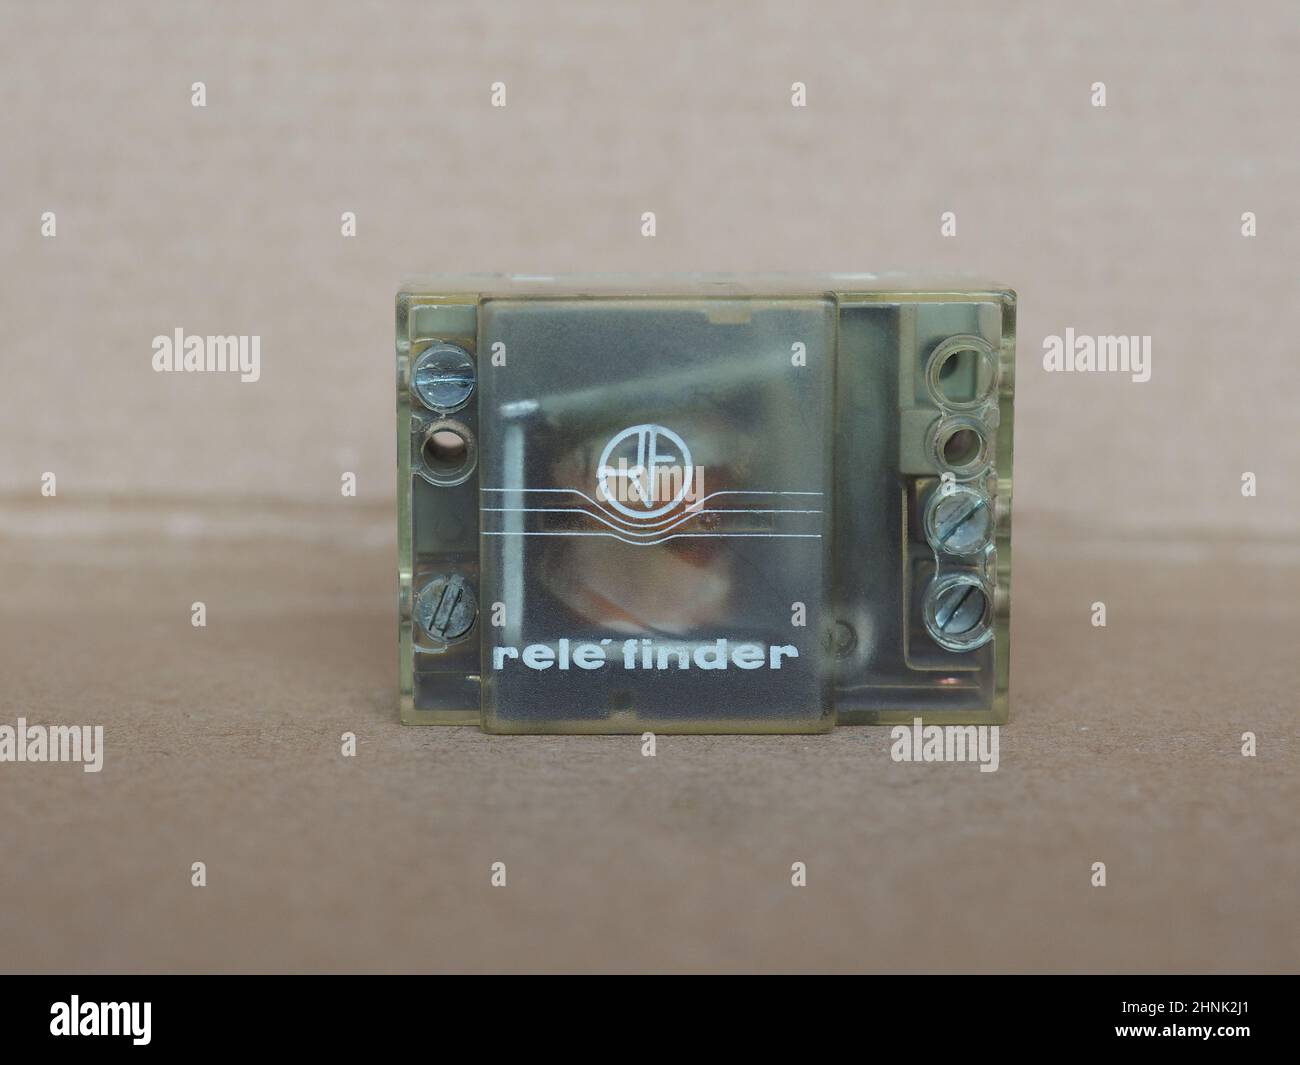 Rele Finder relay Stock Photo - Alamy